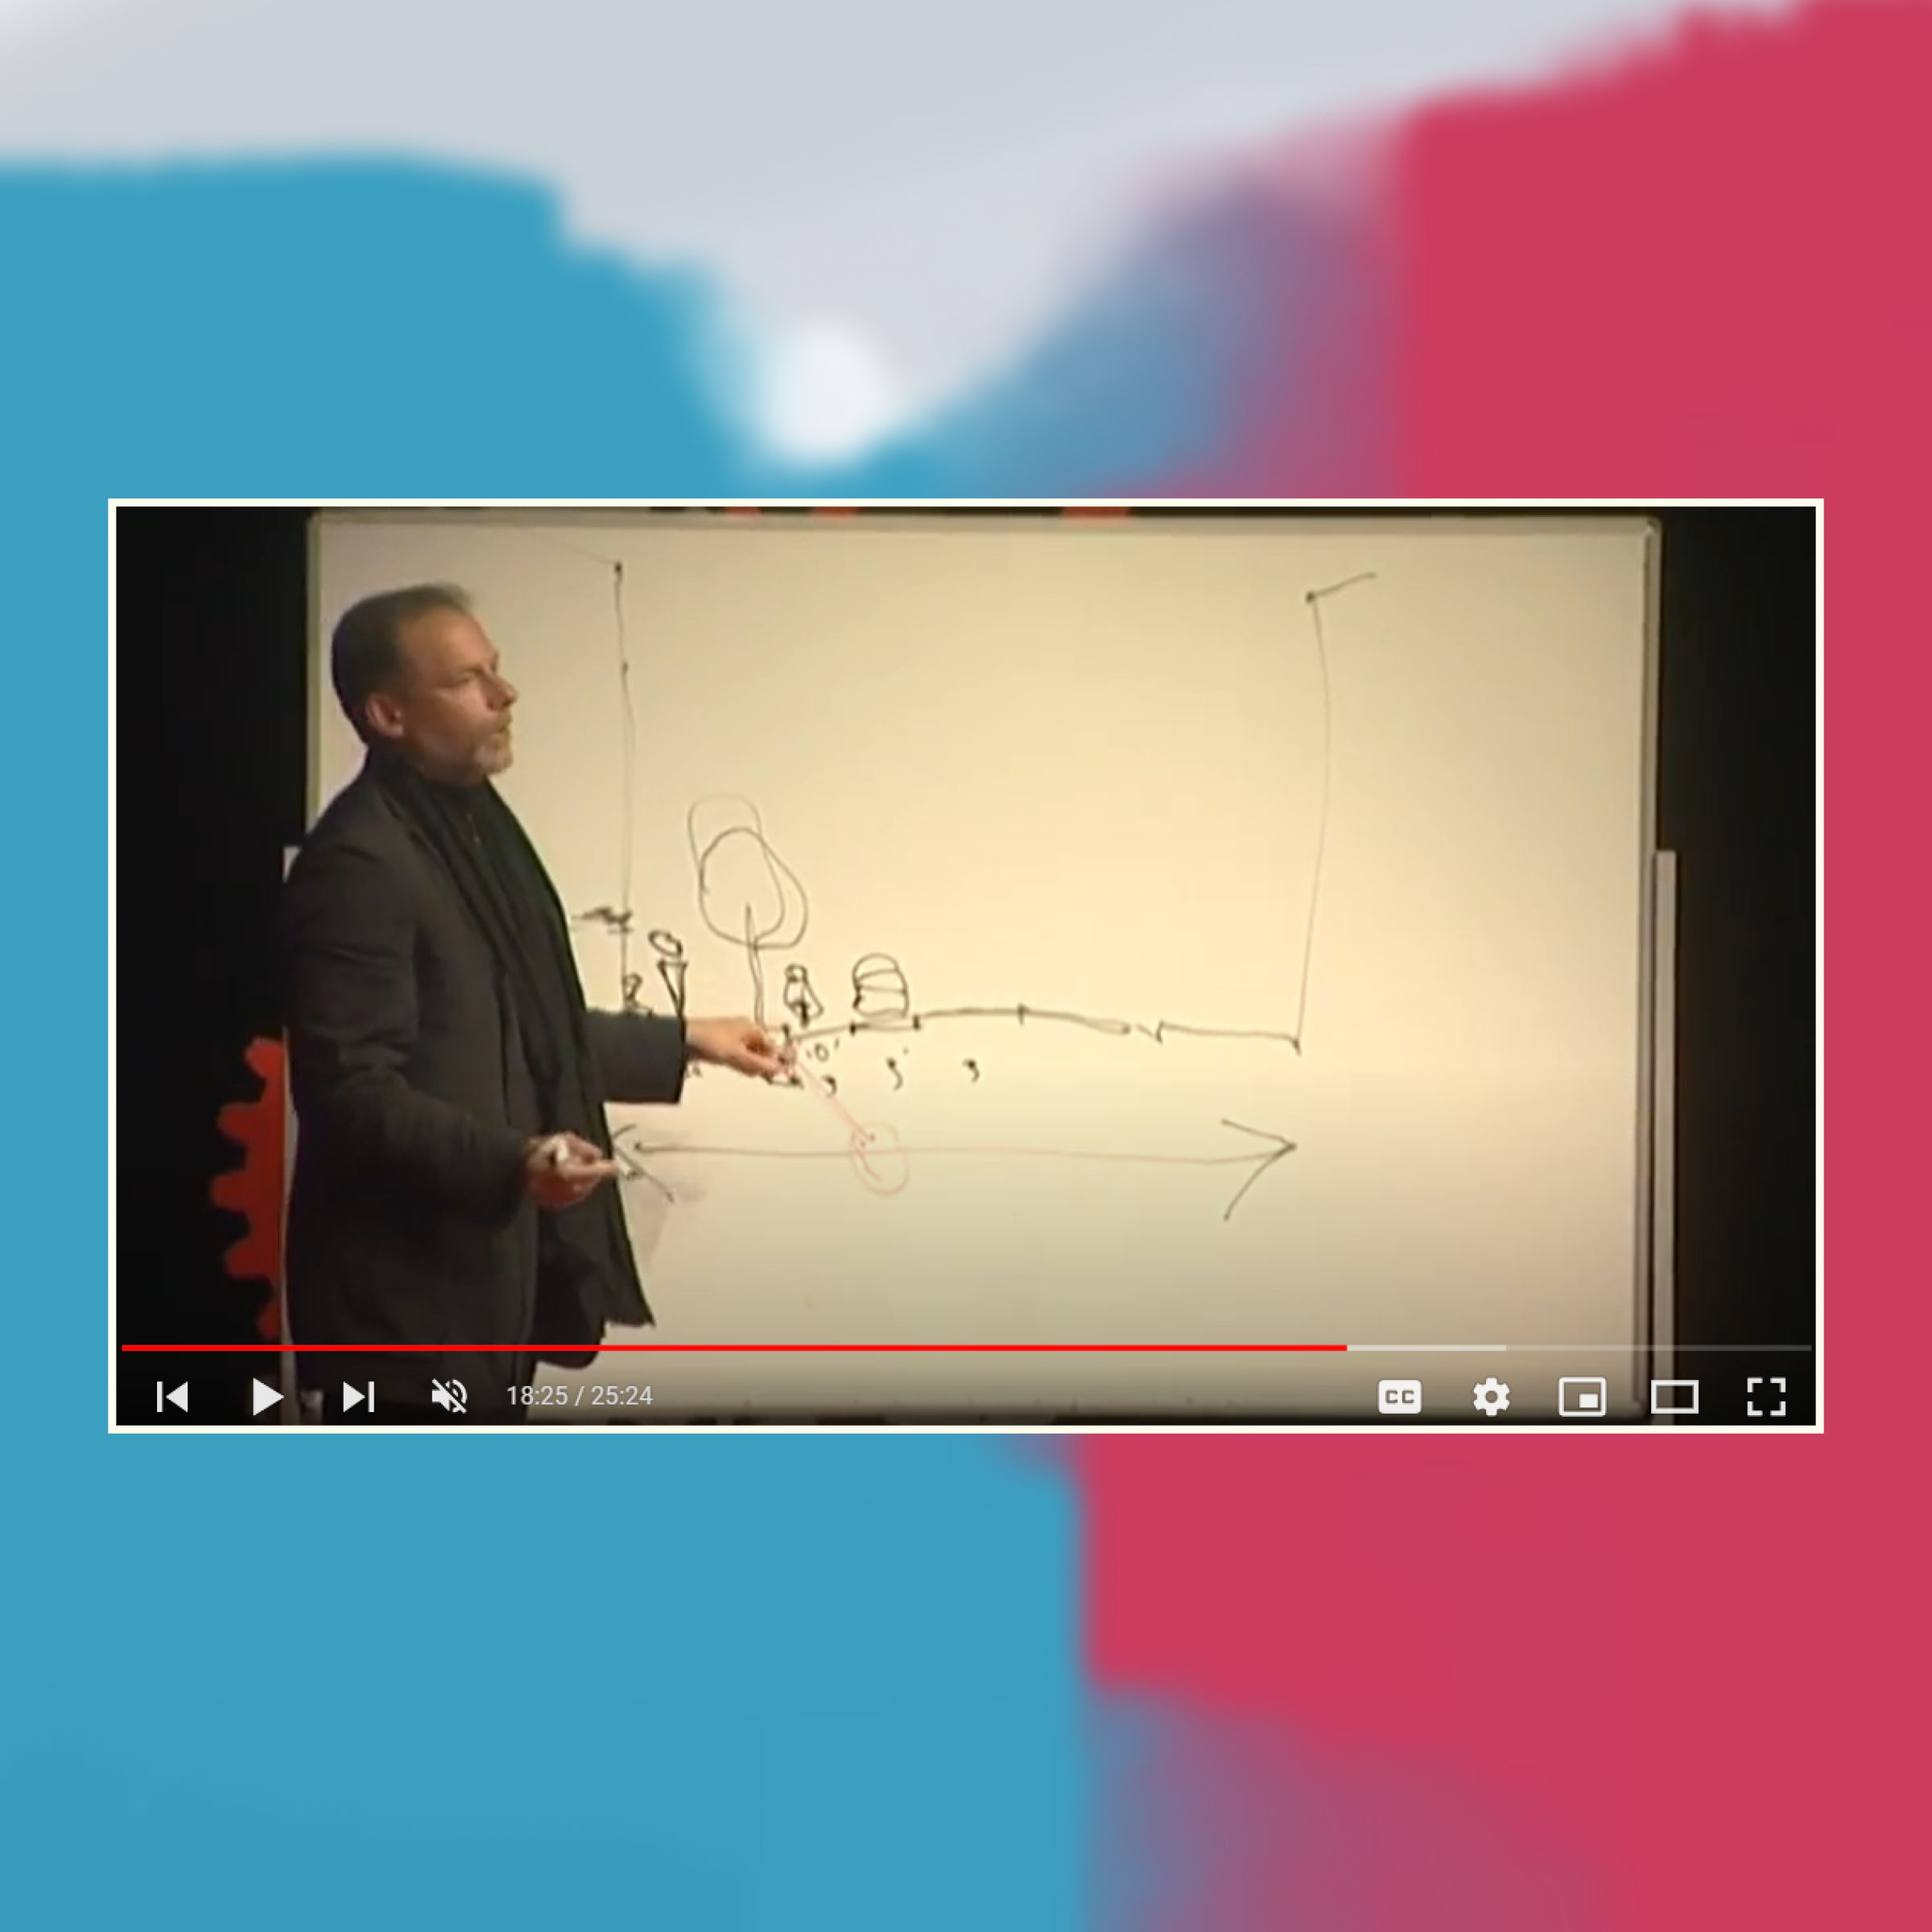 Screenshot of Alexandros Washburn’s talk against an abstract painted background